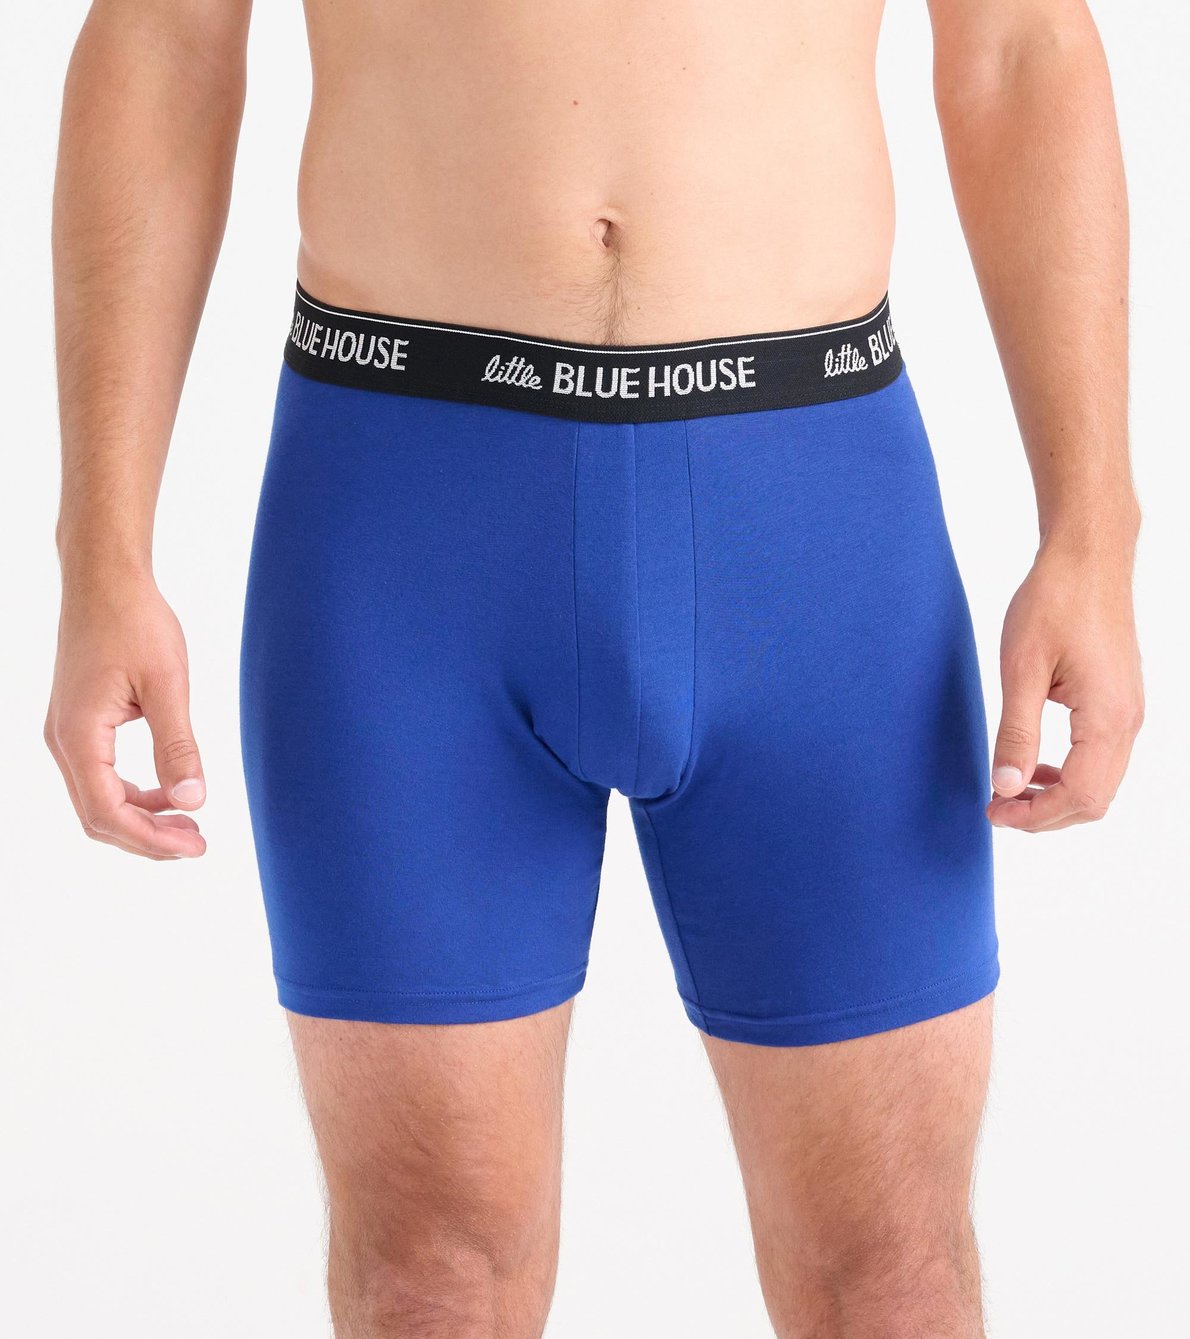 View larger image of Two Balls Men's Boxer Brief